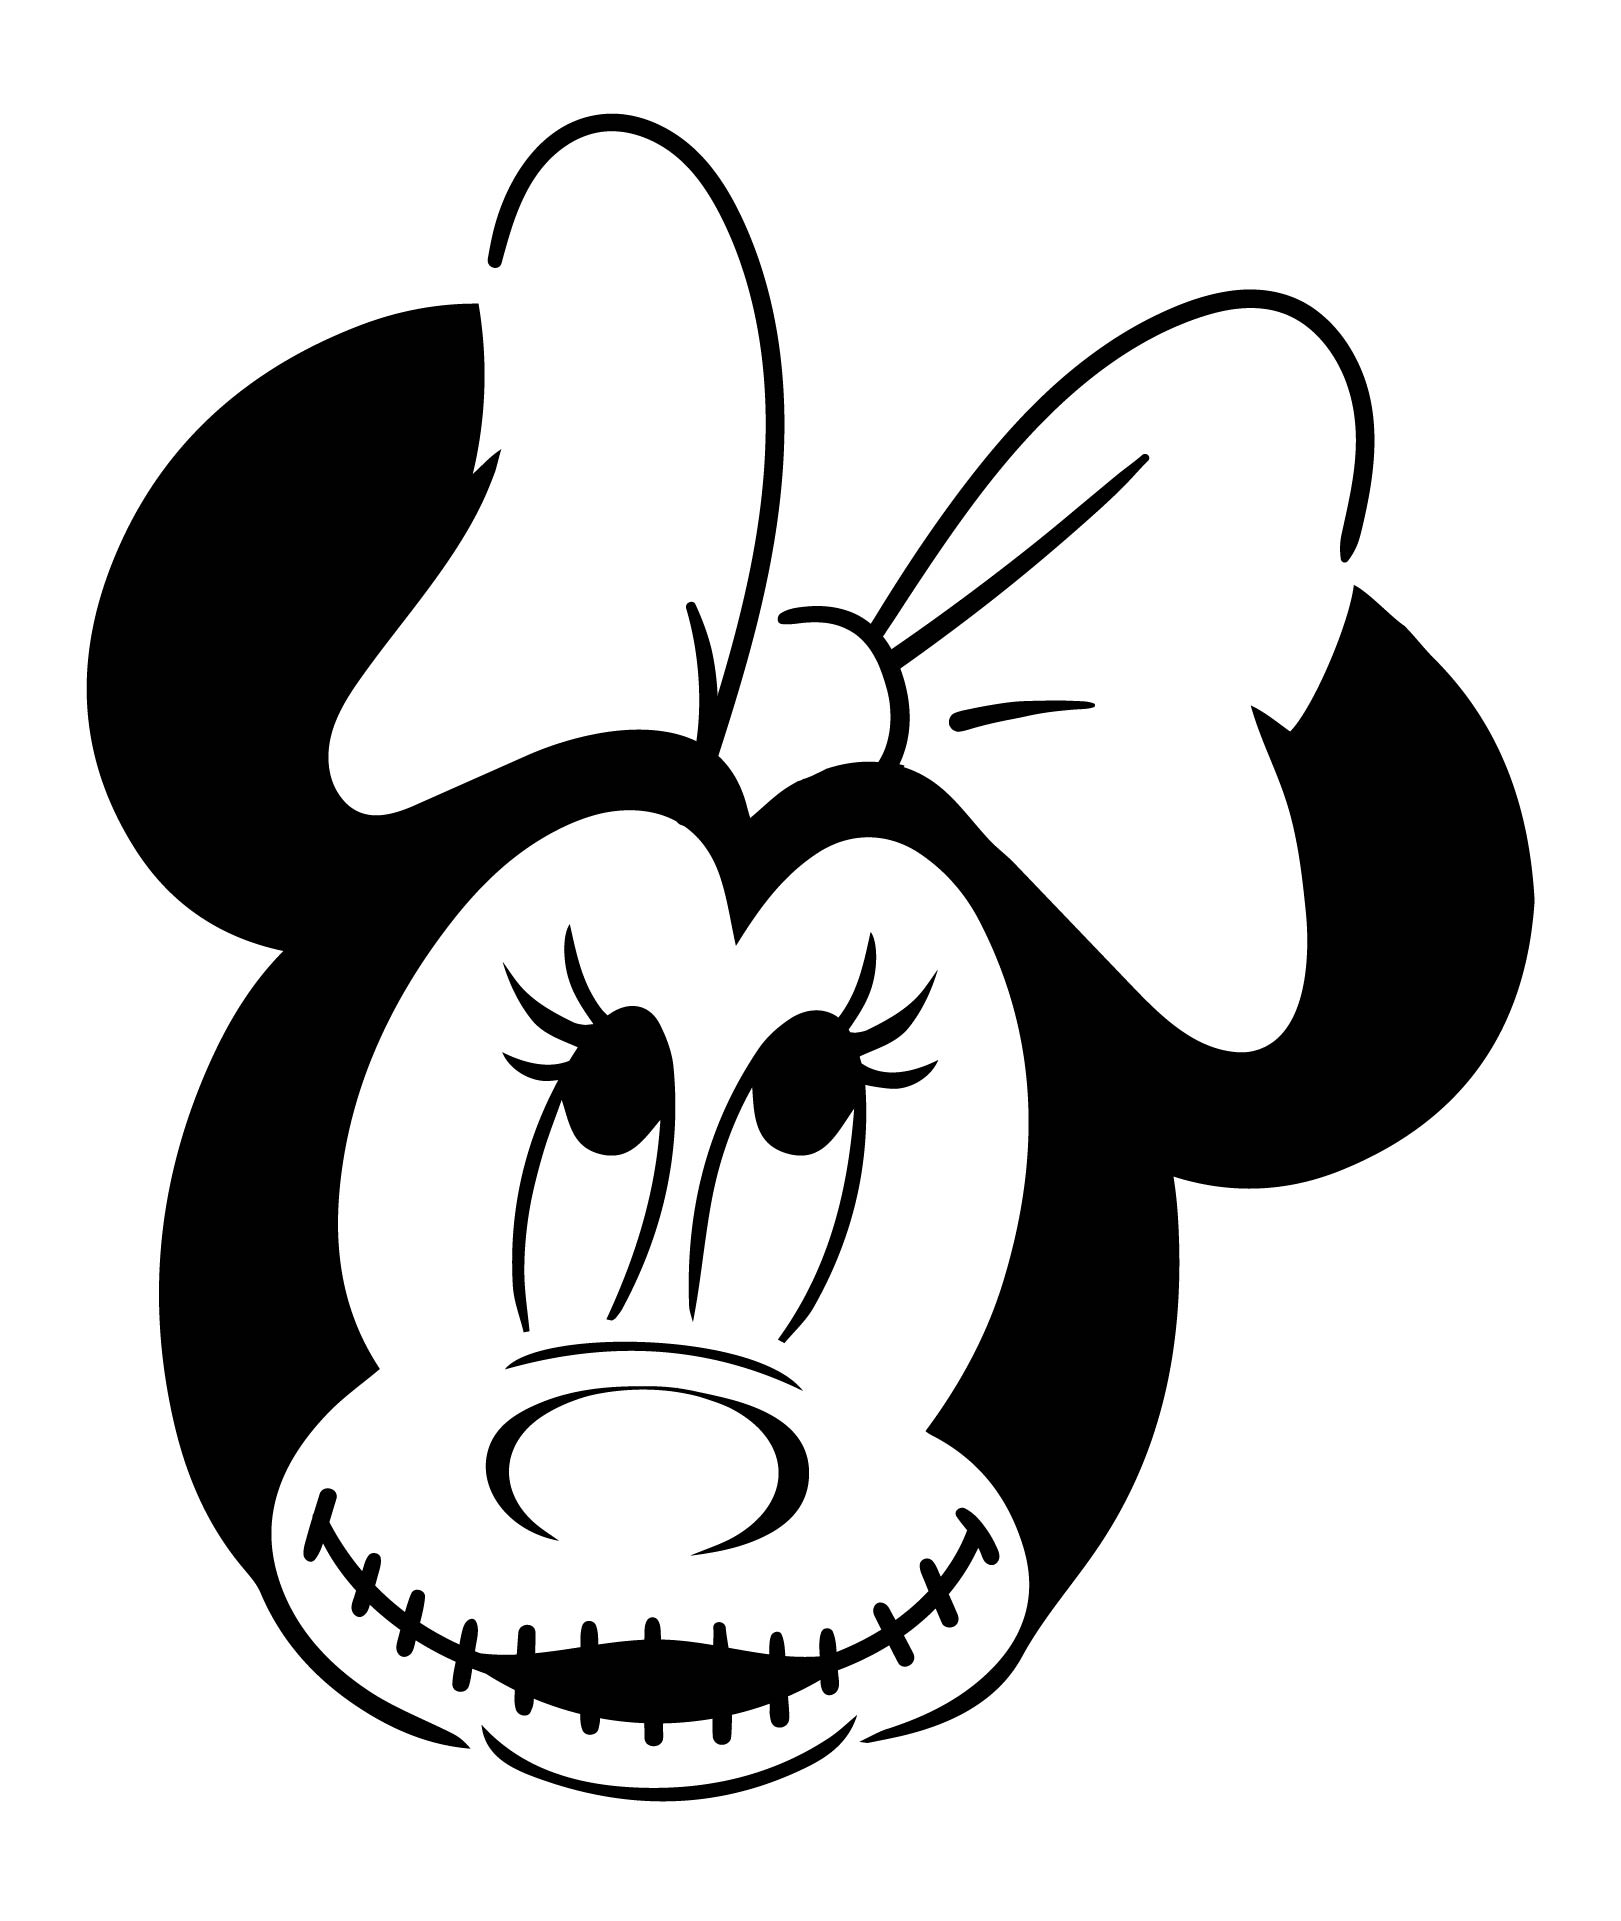 5 Best Images of Minnie Mouse Pumpkin Stencils Printable Free